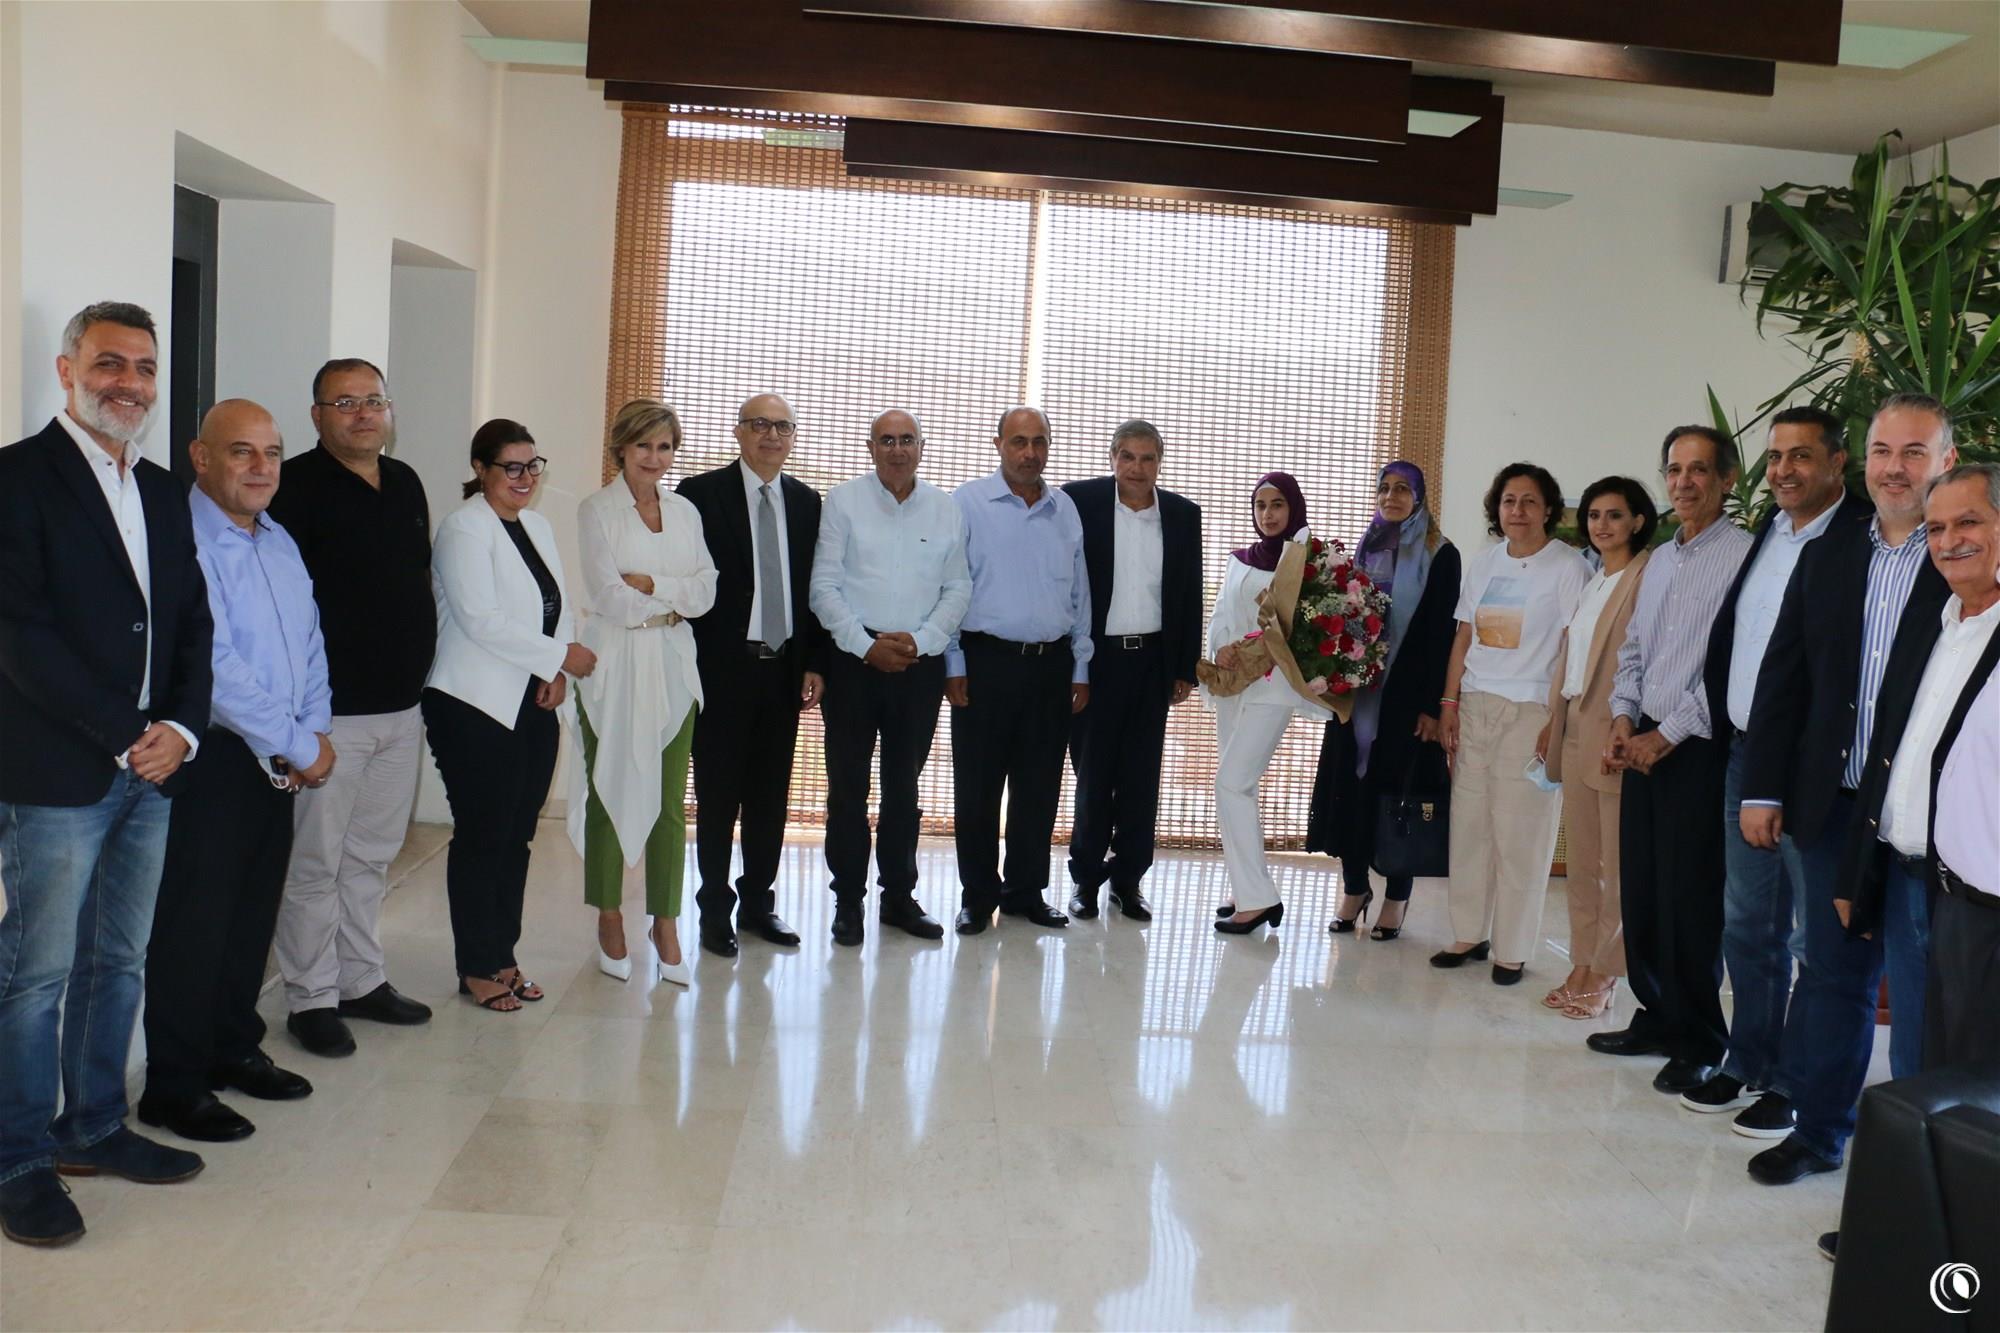 Within its effort to encourage outstanding students, children of tobacco farmers: The Regie honors Amira Zreik who ranked first in Lebanon in Brevet